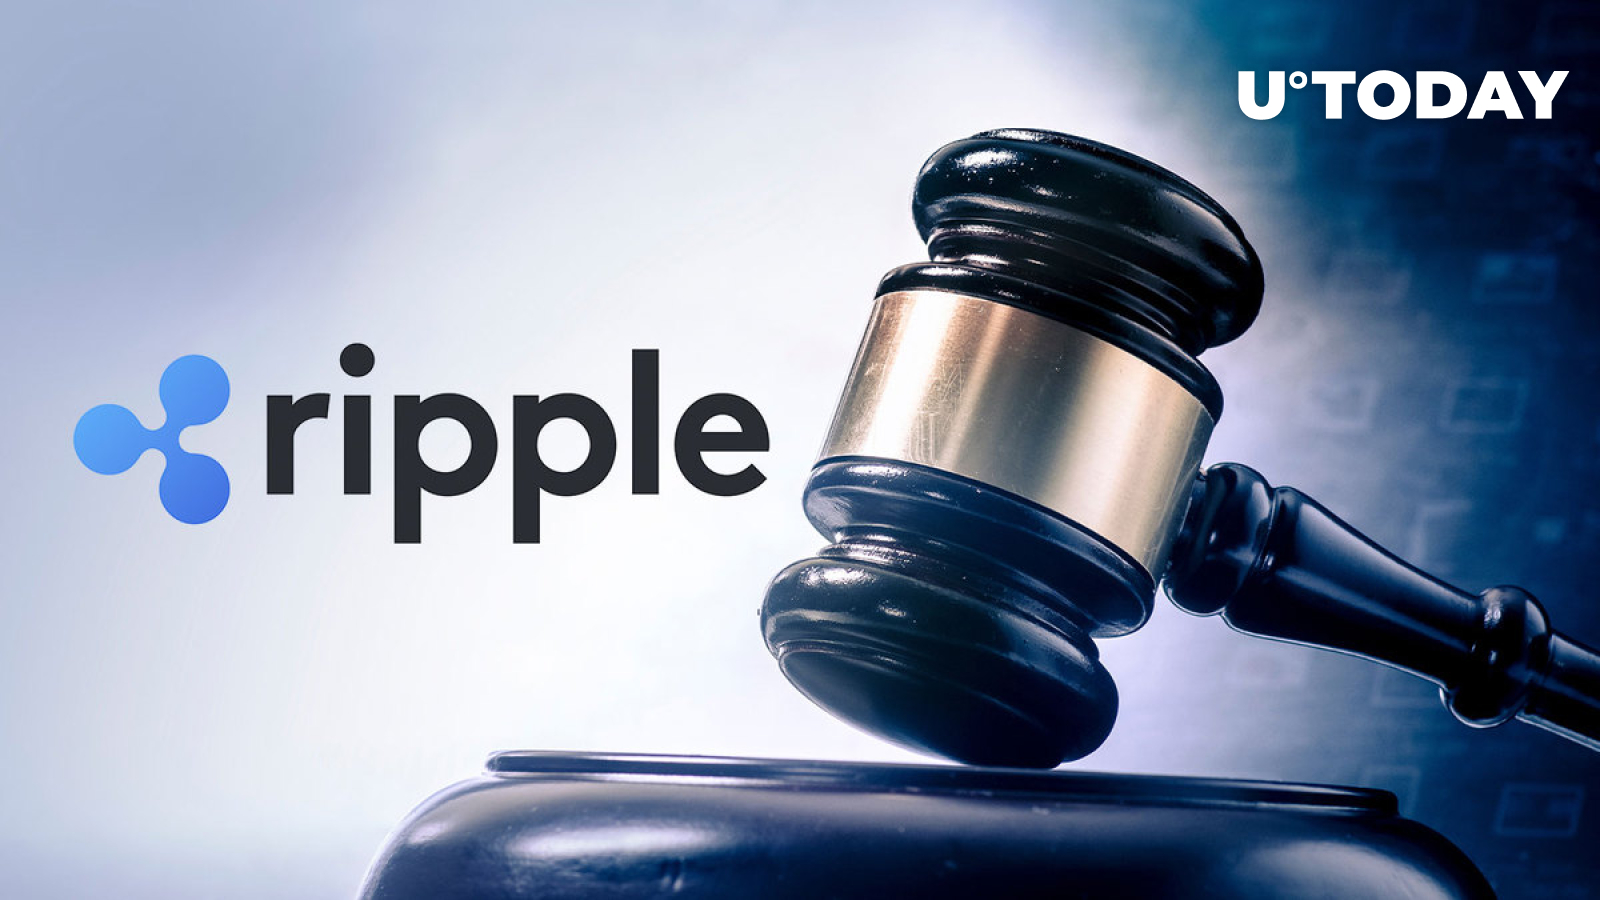 Ripple Lawsuit: Important Court Dates Coming, Here’s What to Know